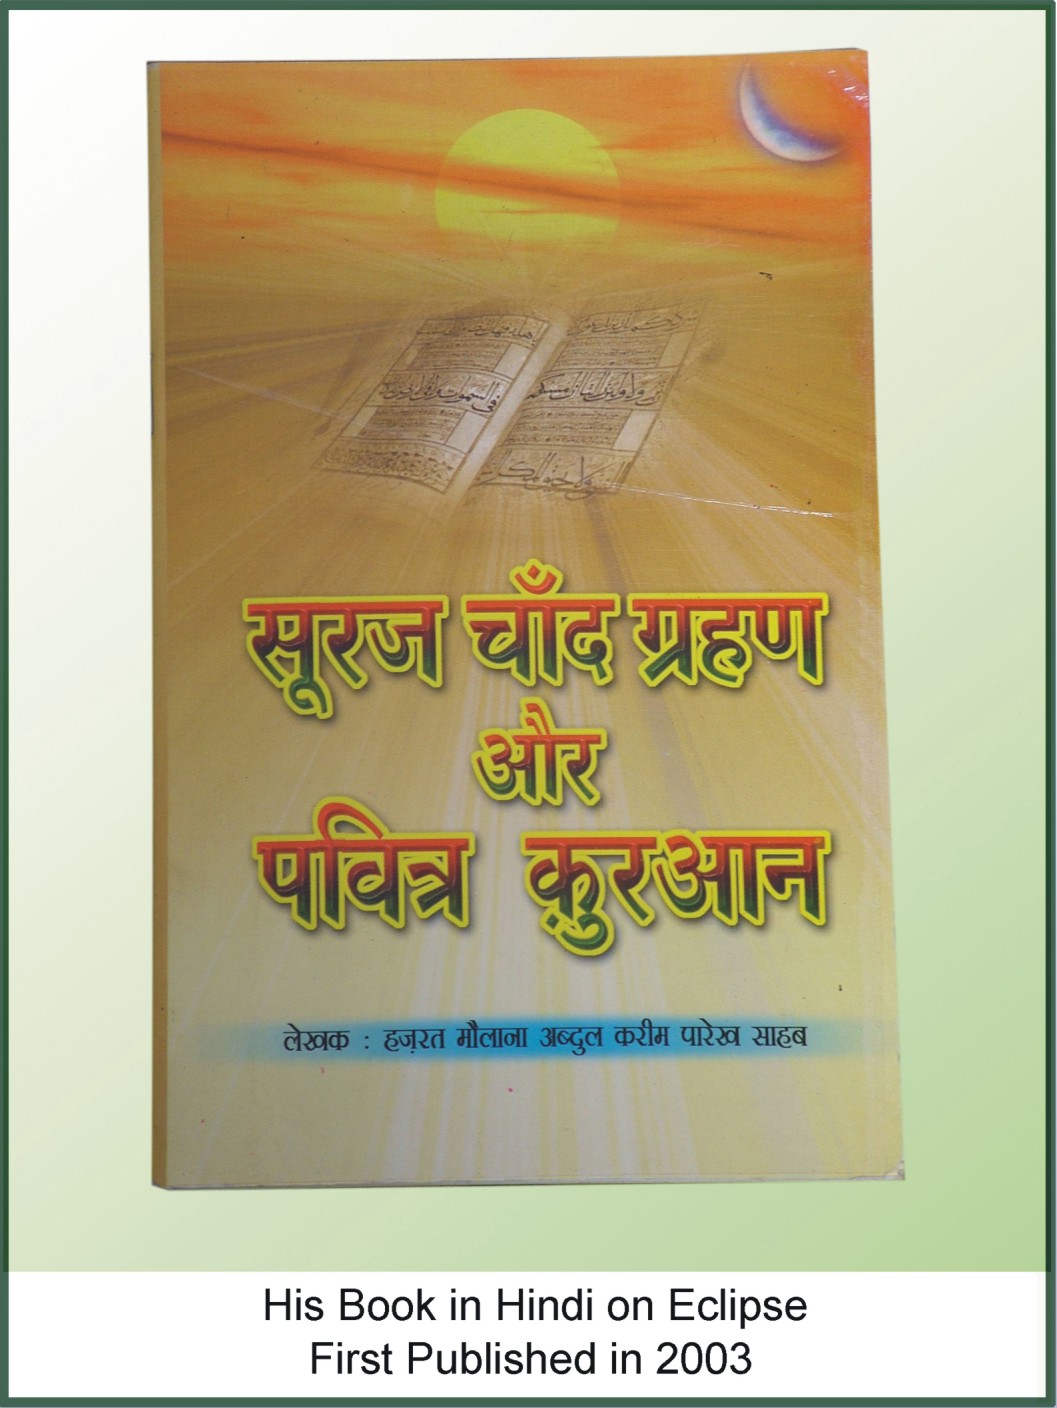 Eclipse and The Holy Qur'an (Hindi) First Published in 2003